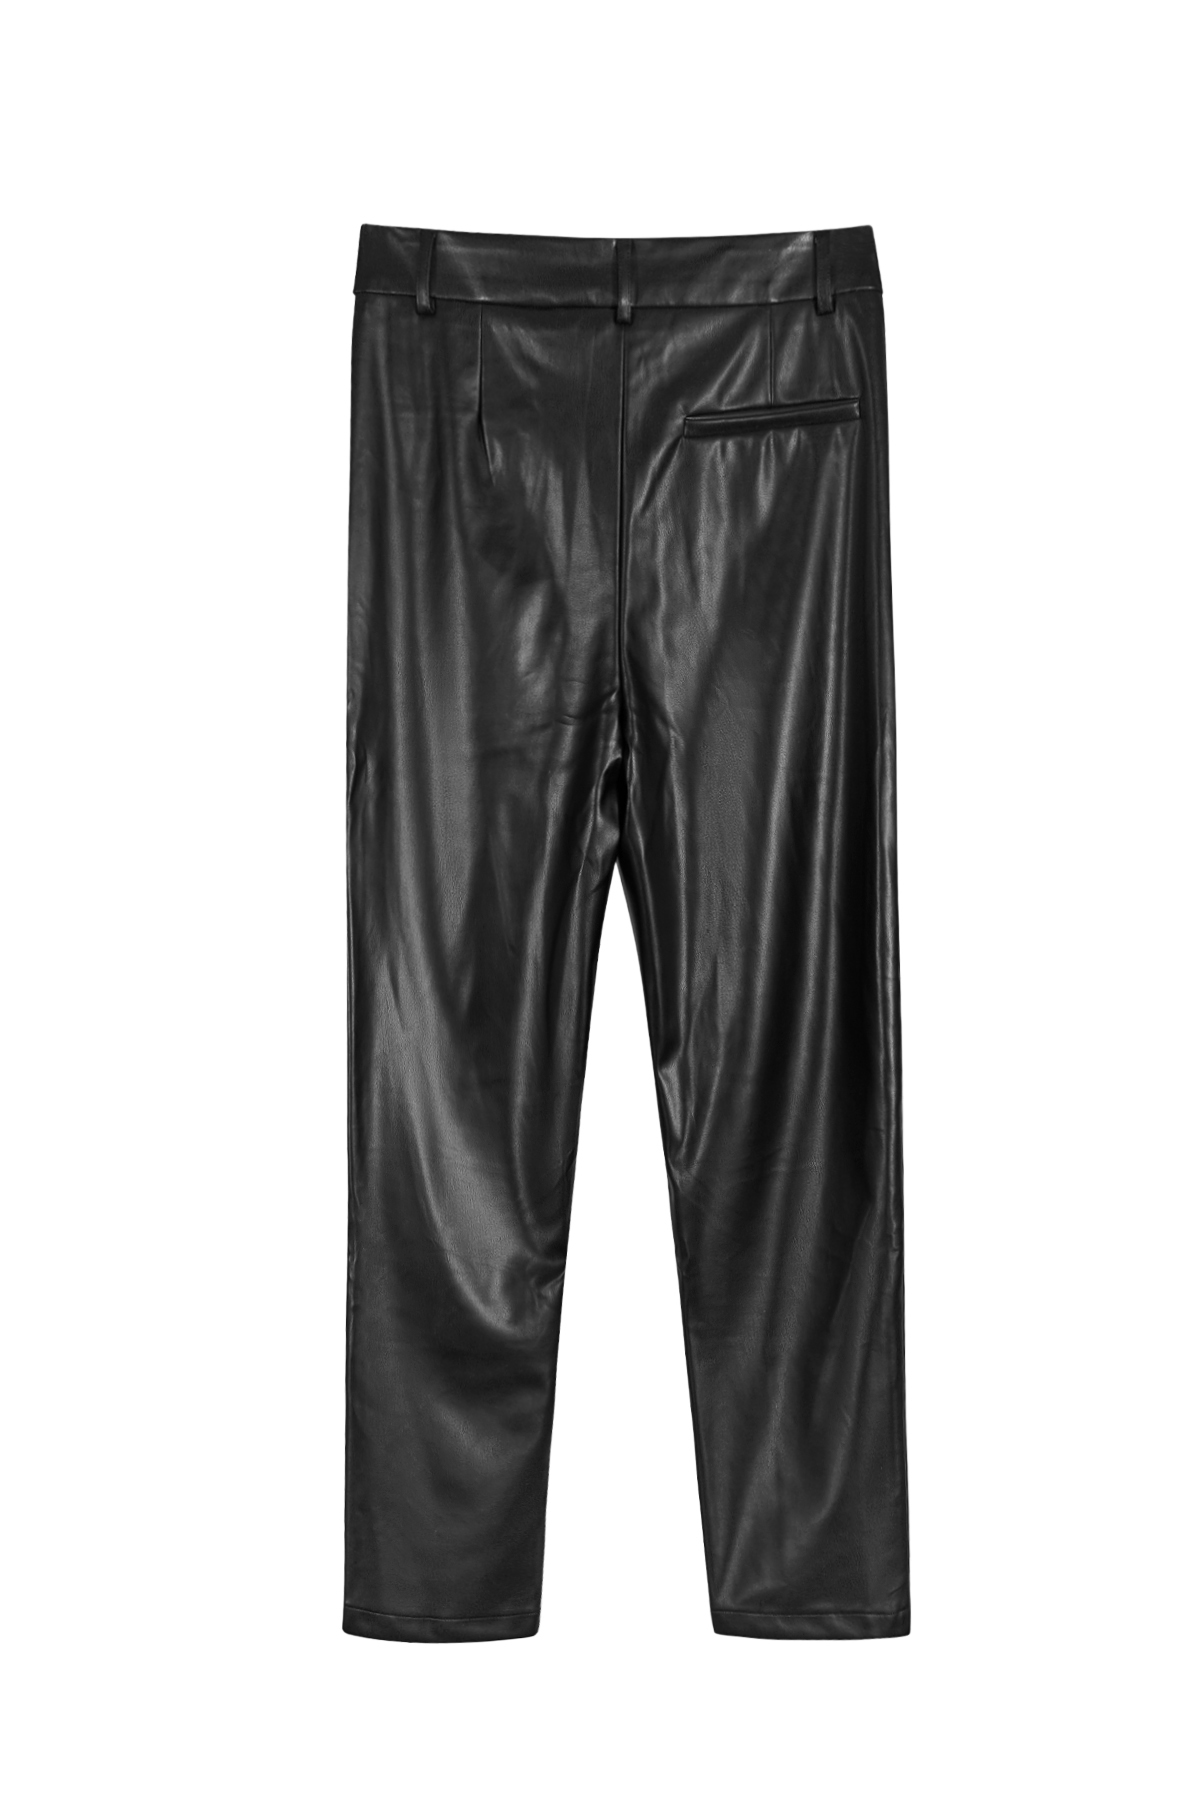 PU leather pants - black Picture7